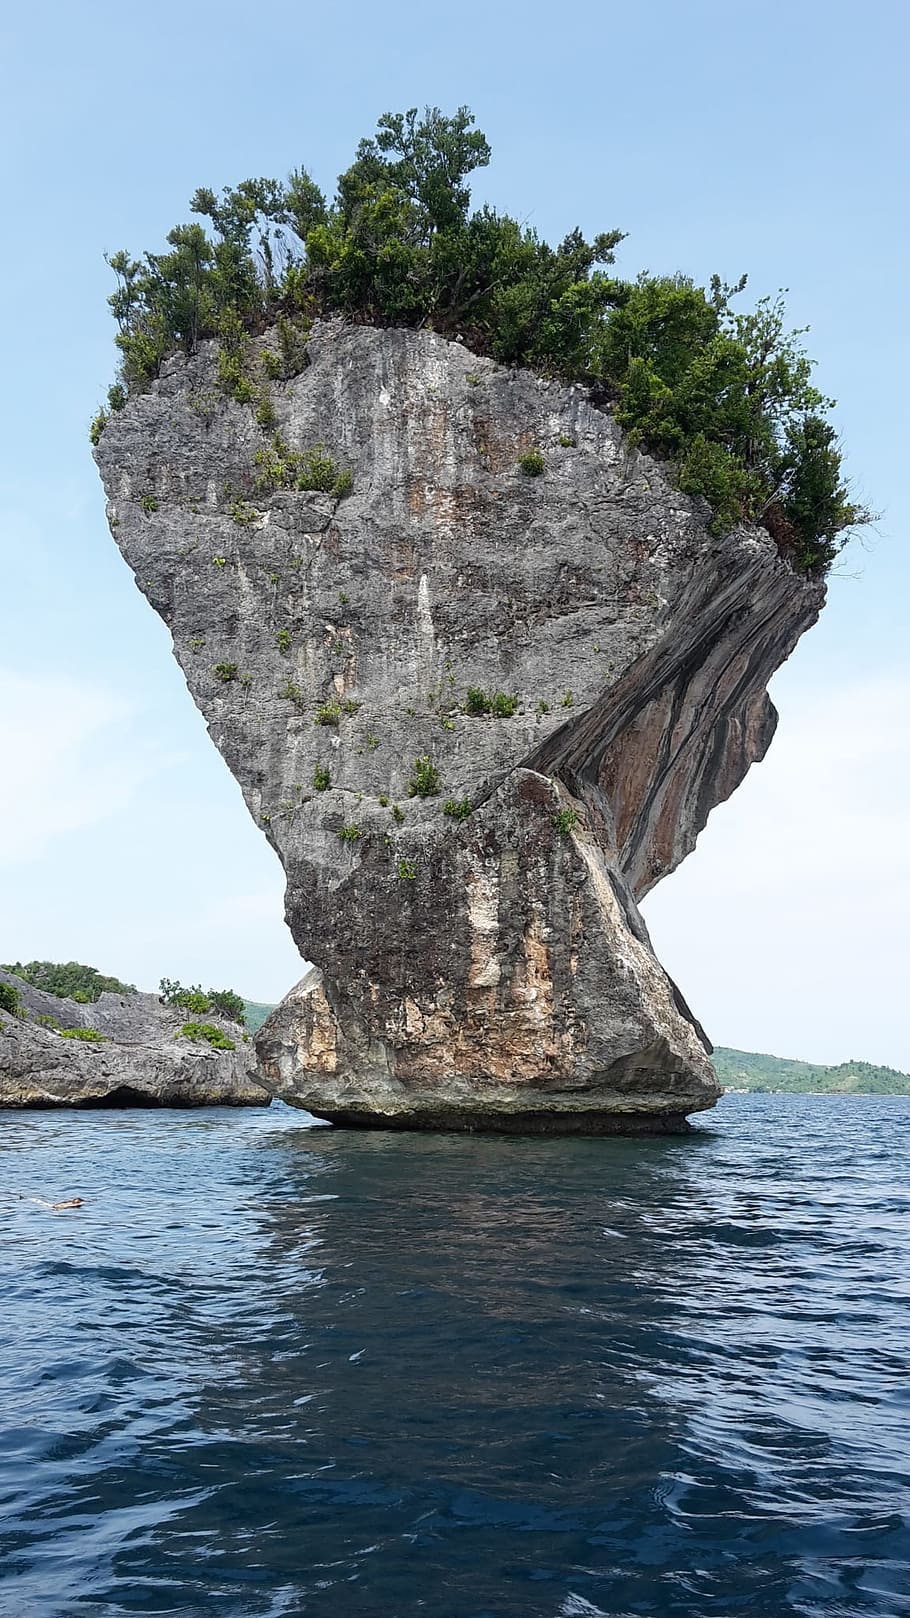 gray, rock formation, middle, body, water, rock, sea, island, coast, philippines